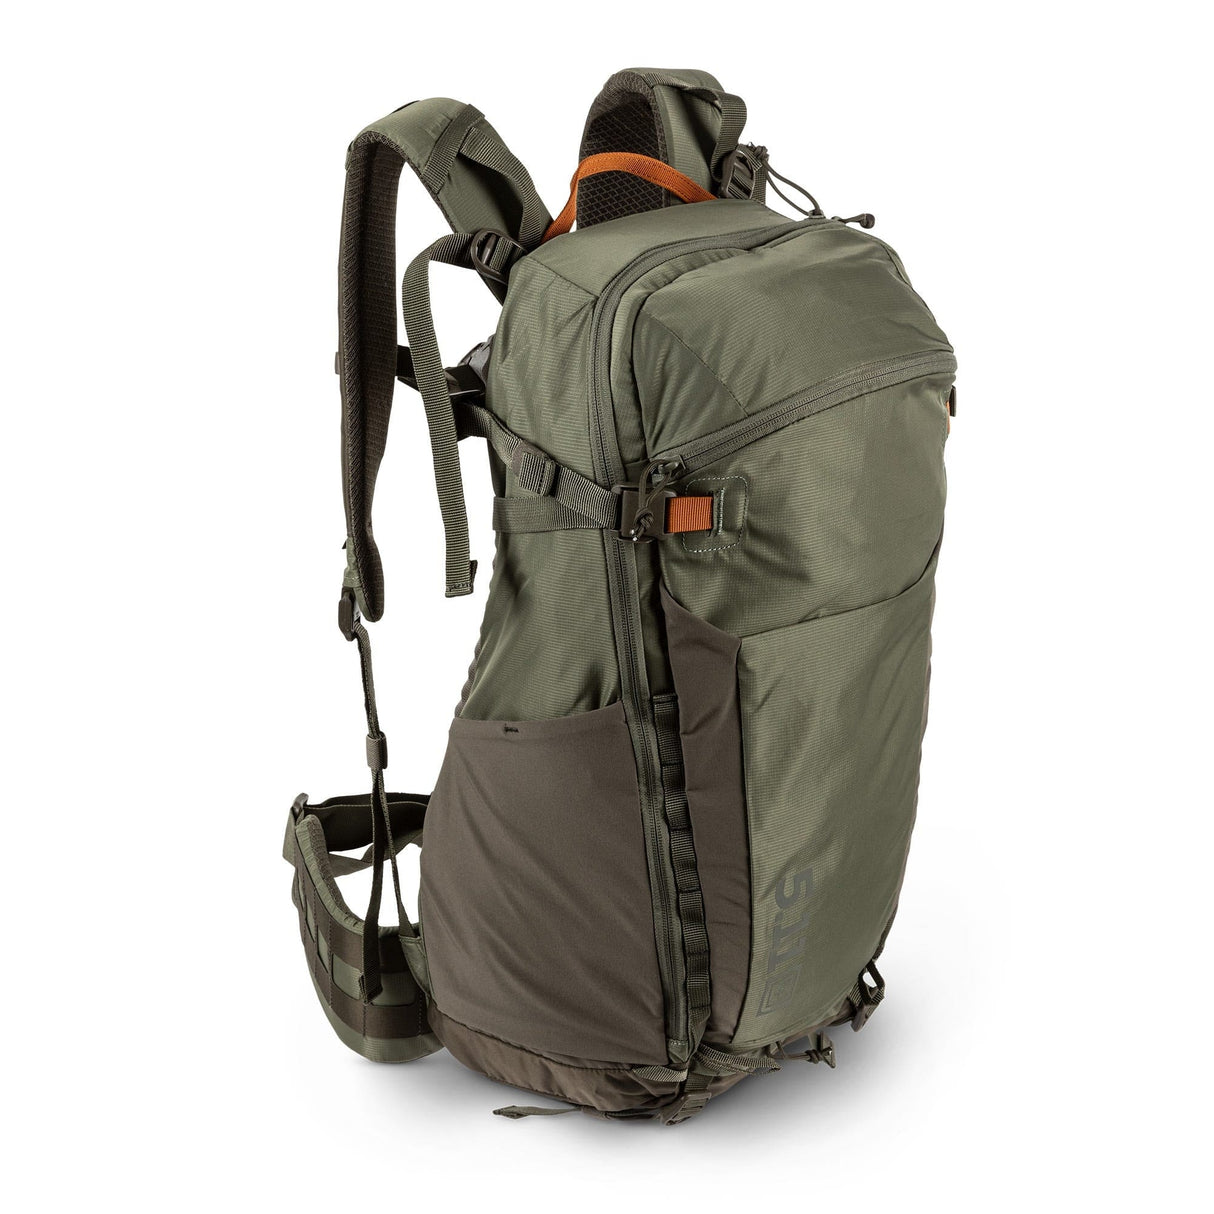 SKYWEIGHT 36L BACKPACK